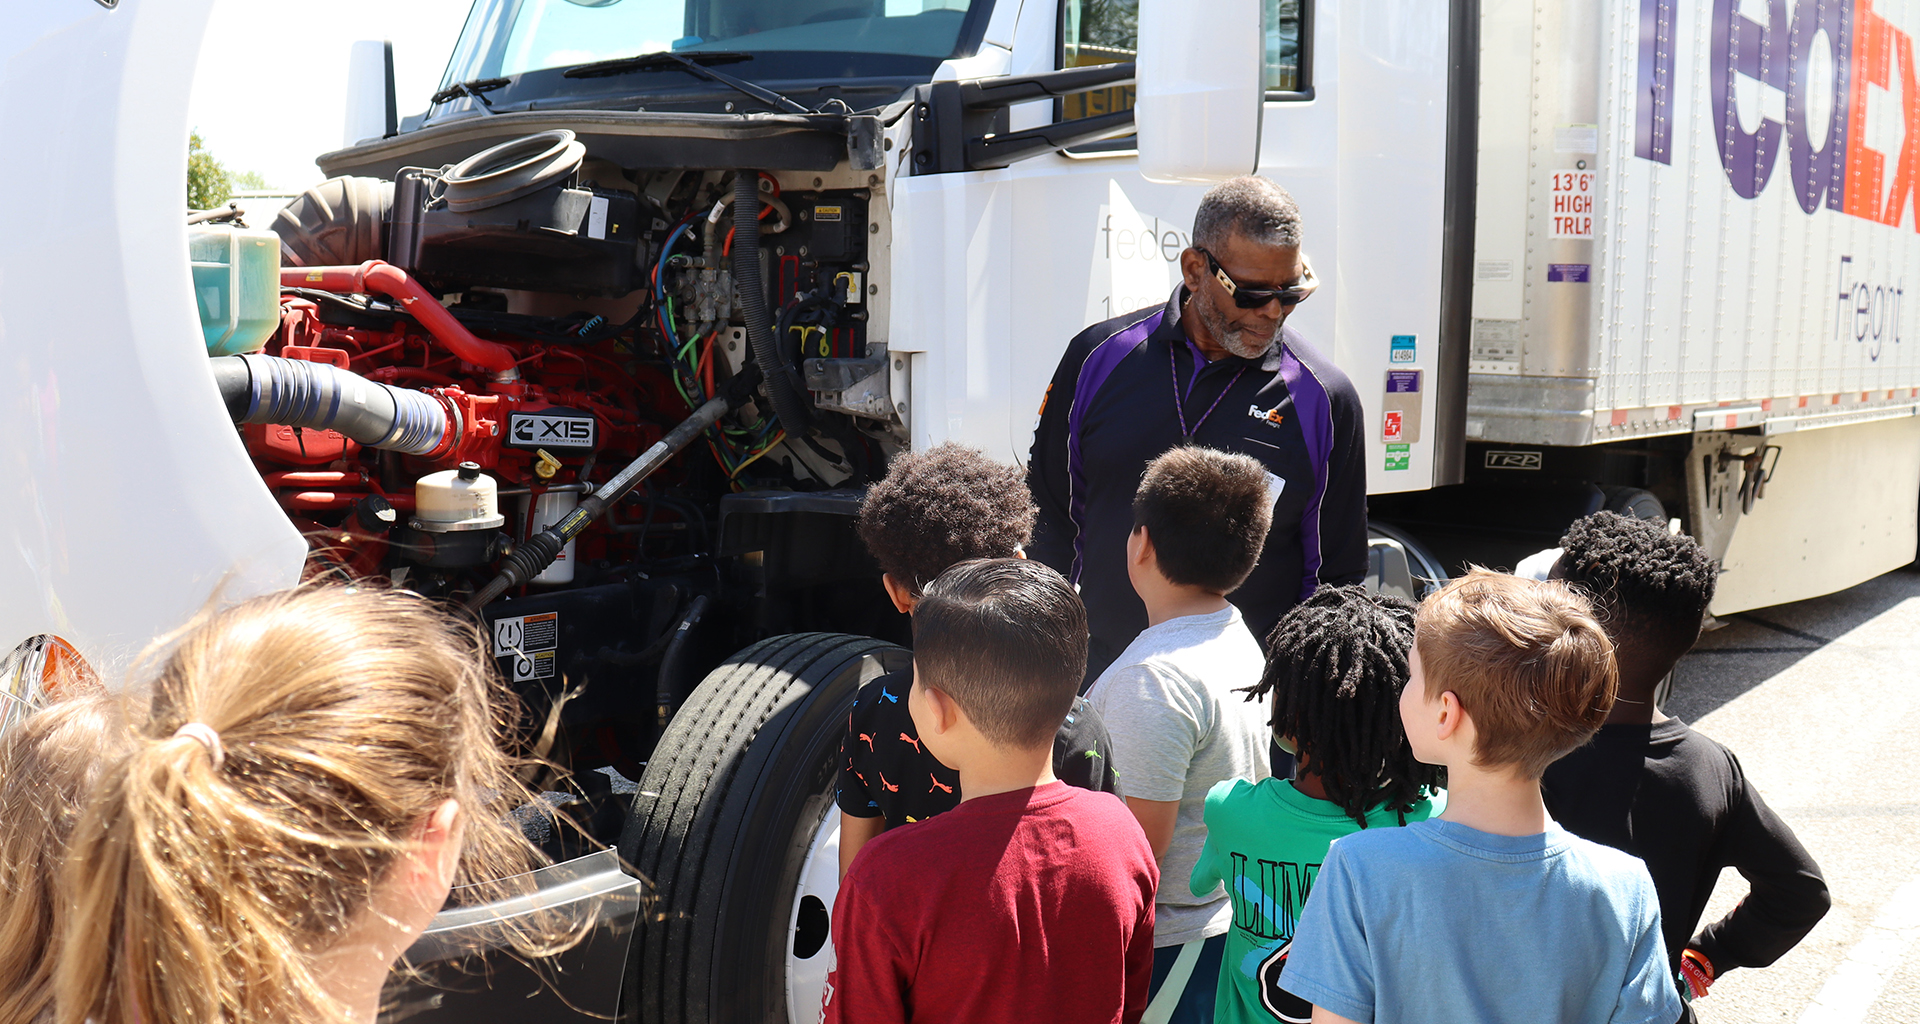 Several students looking at inside of a fedex truck engine while driver talks to them.